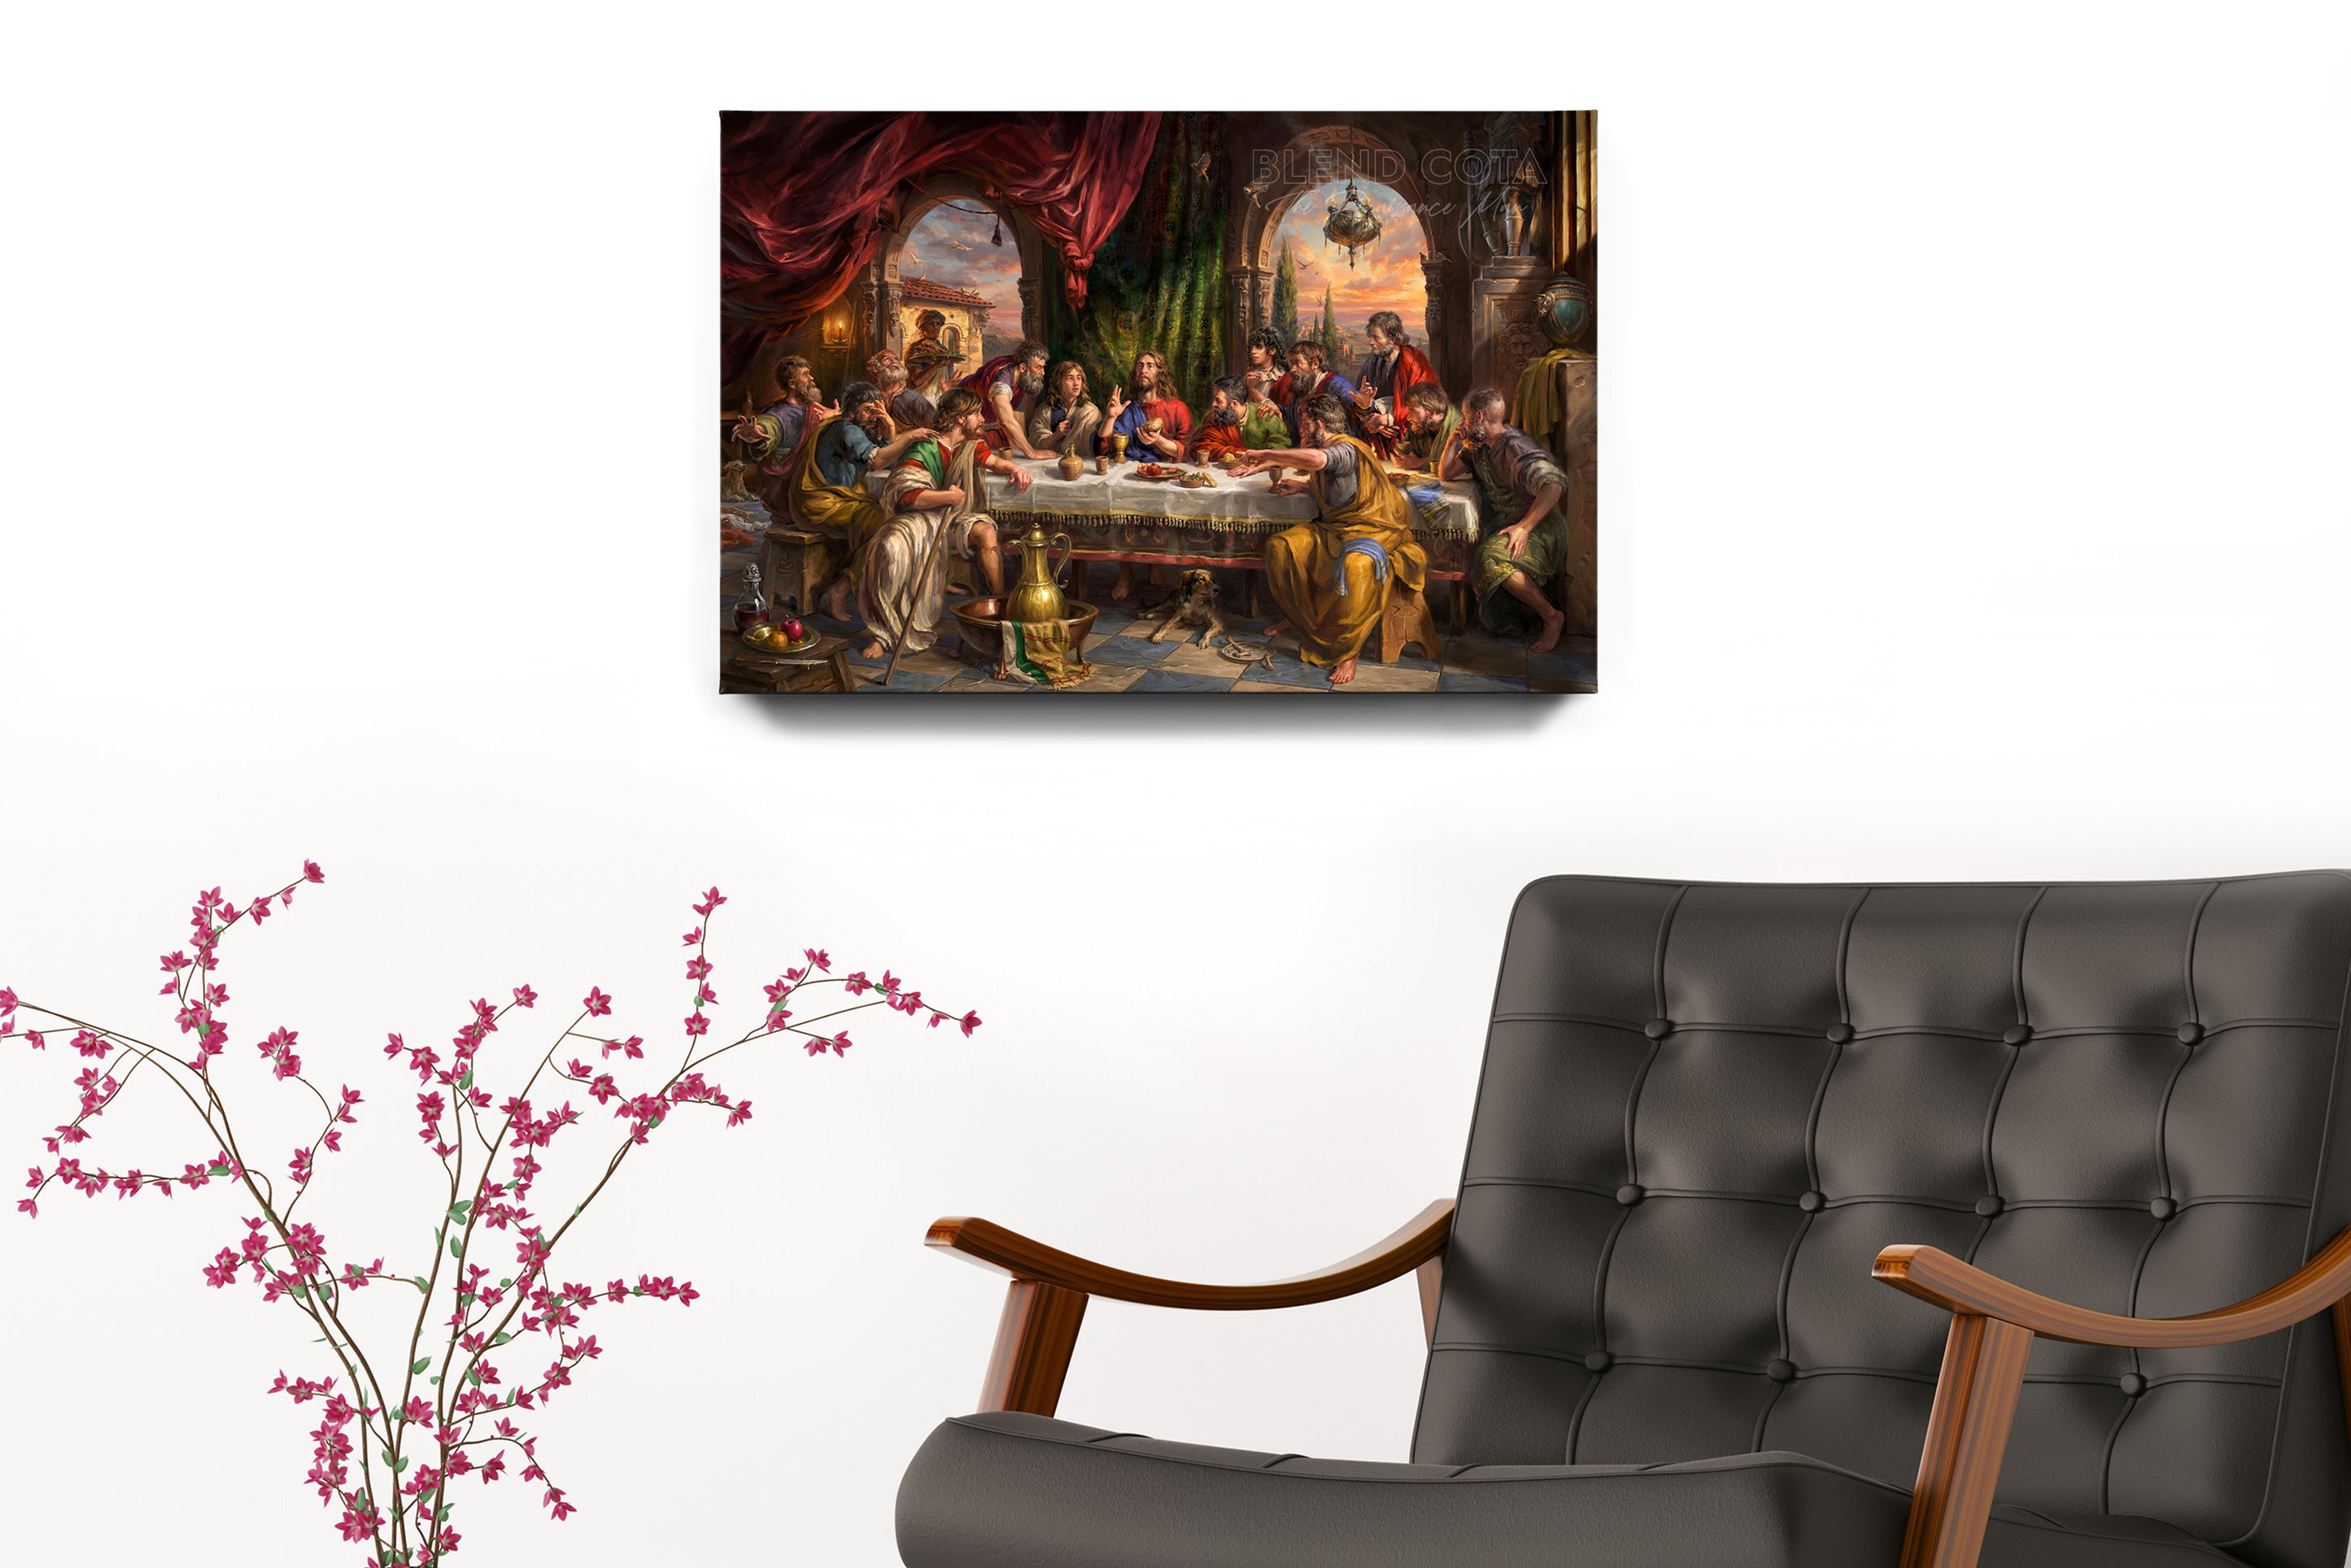 The Last Supper - Blend Cota Art Print Framed on Canvas - Blend Cota Studios painting hanging on a white wall behind  black armchair and vase of flowers